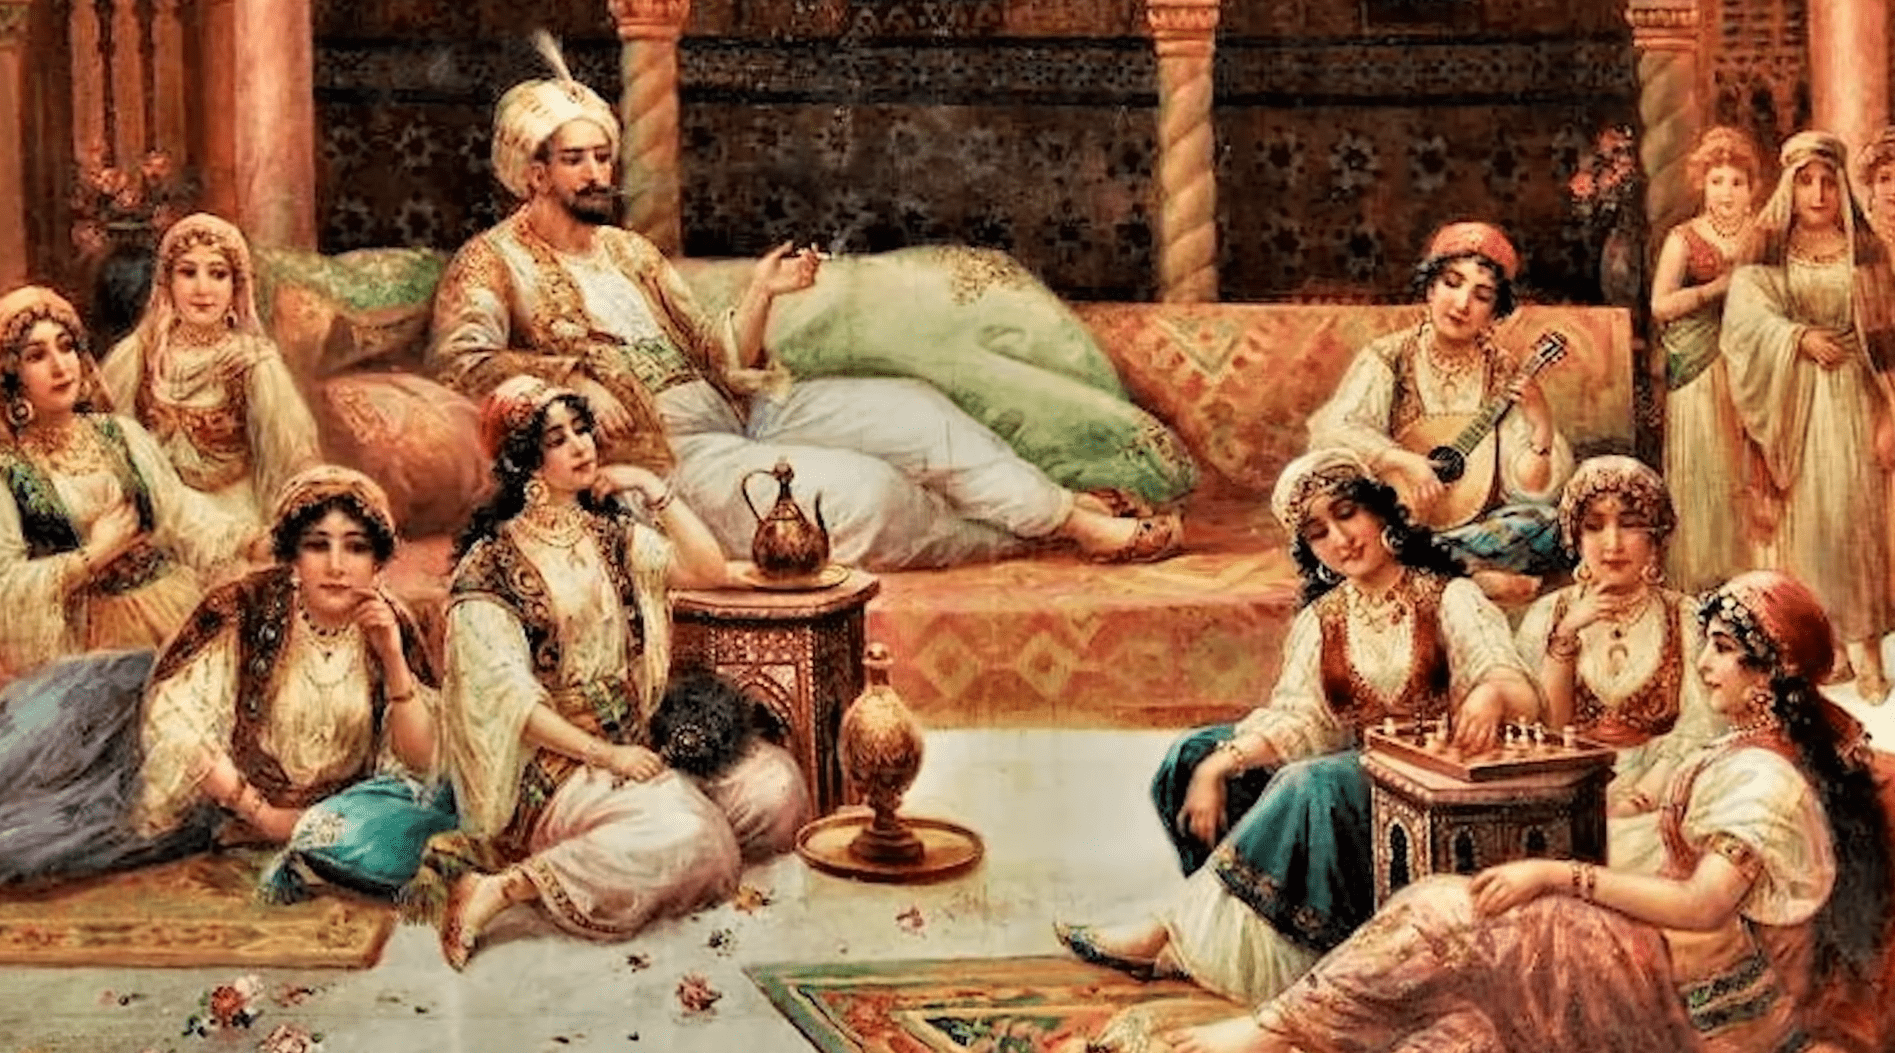 CREEPY Things That Were “Normal” in Ottoman Empire￼